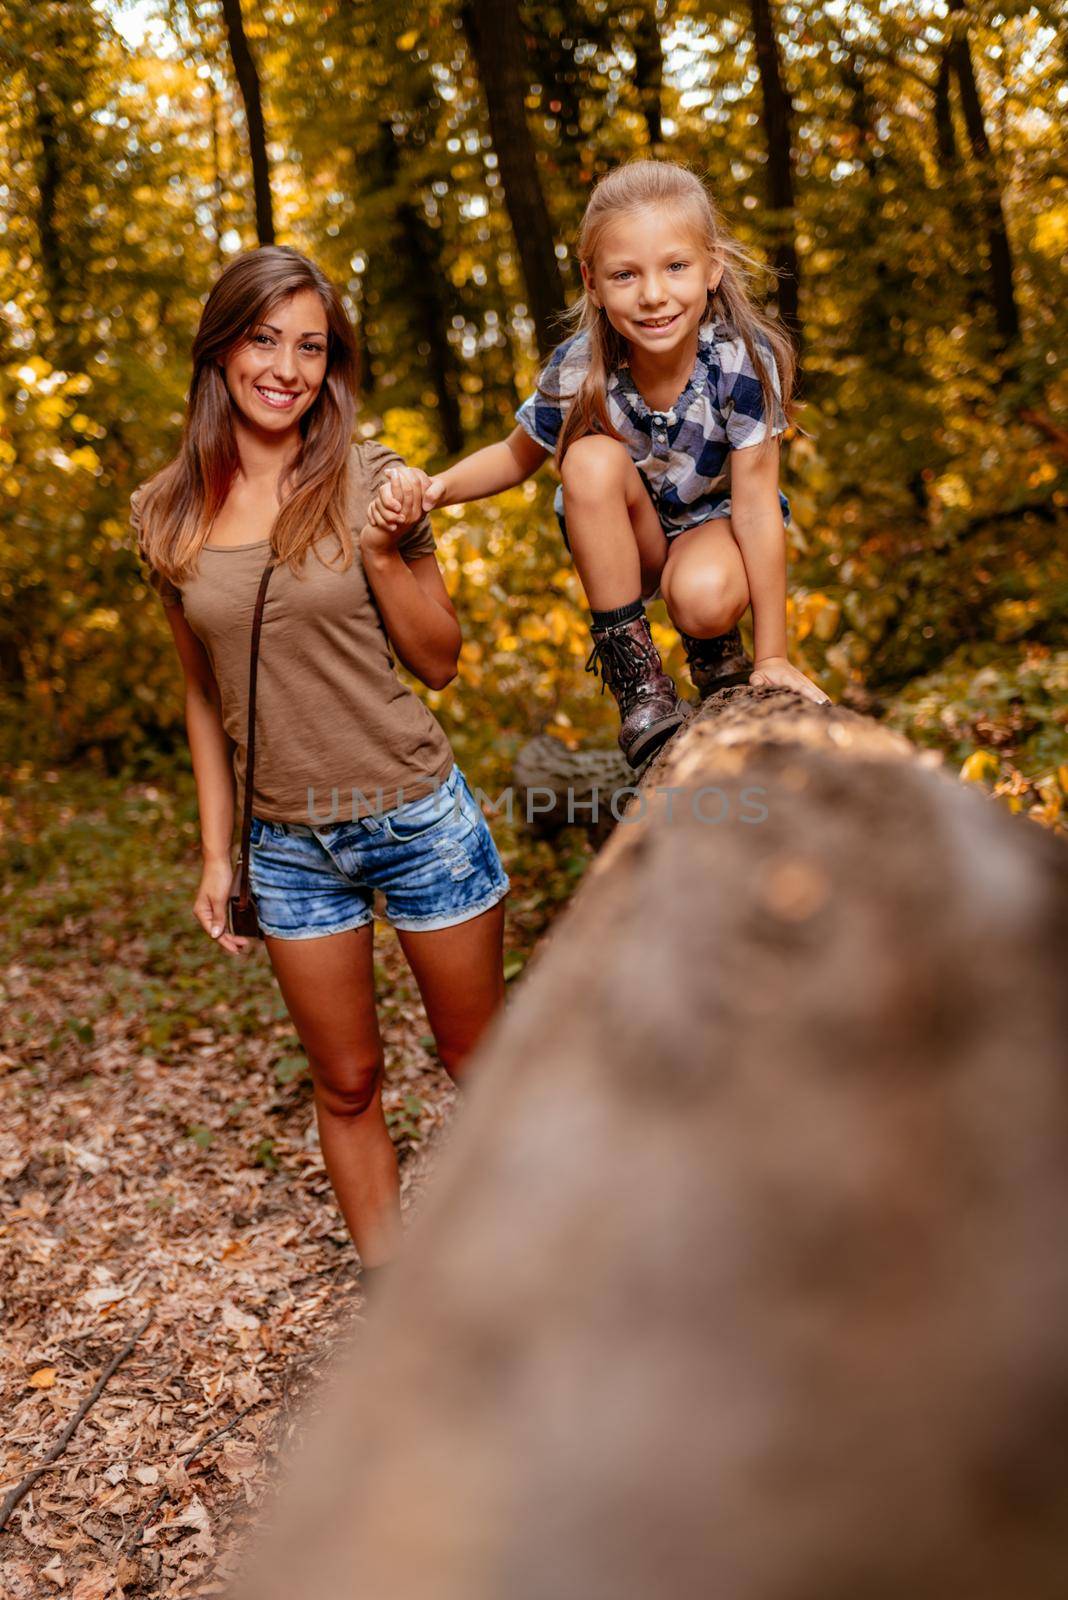 Fun In The Autumn Forest by MilanMarkovic78